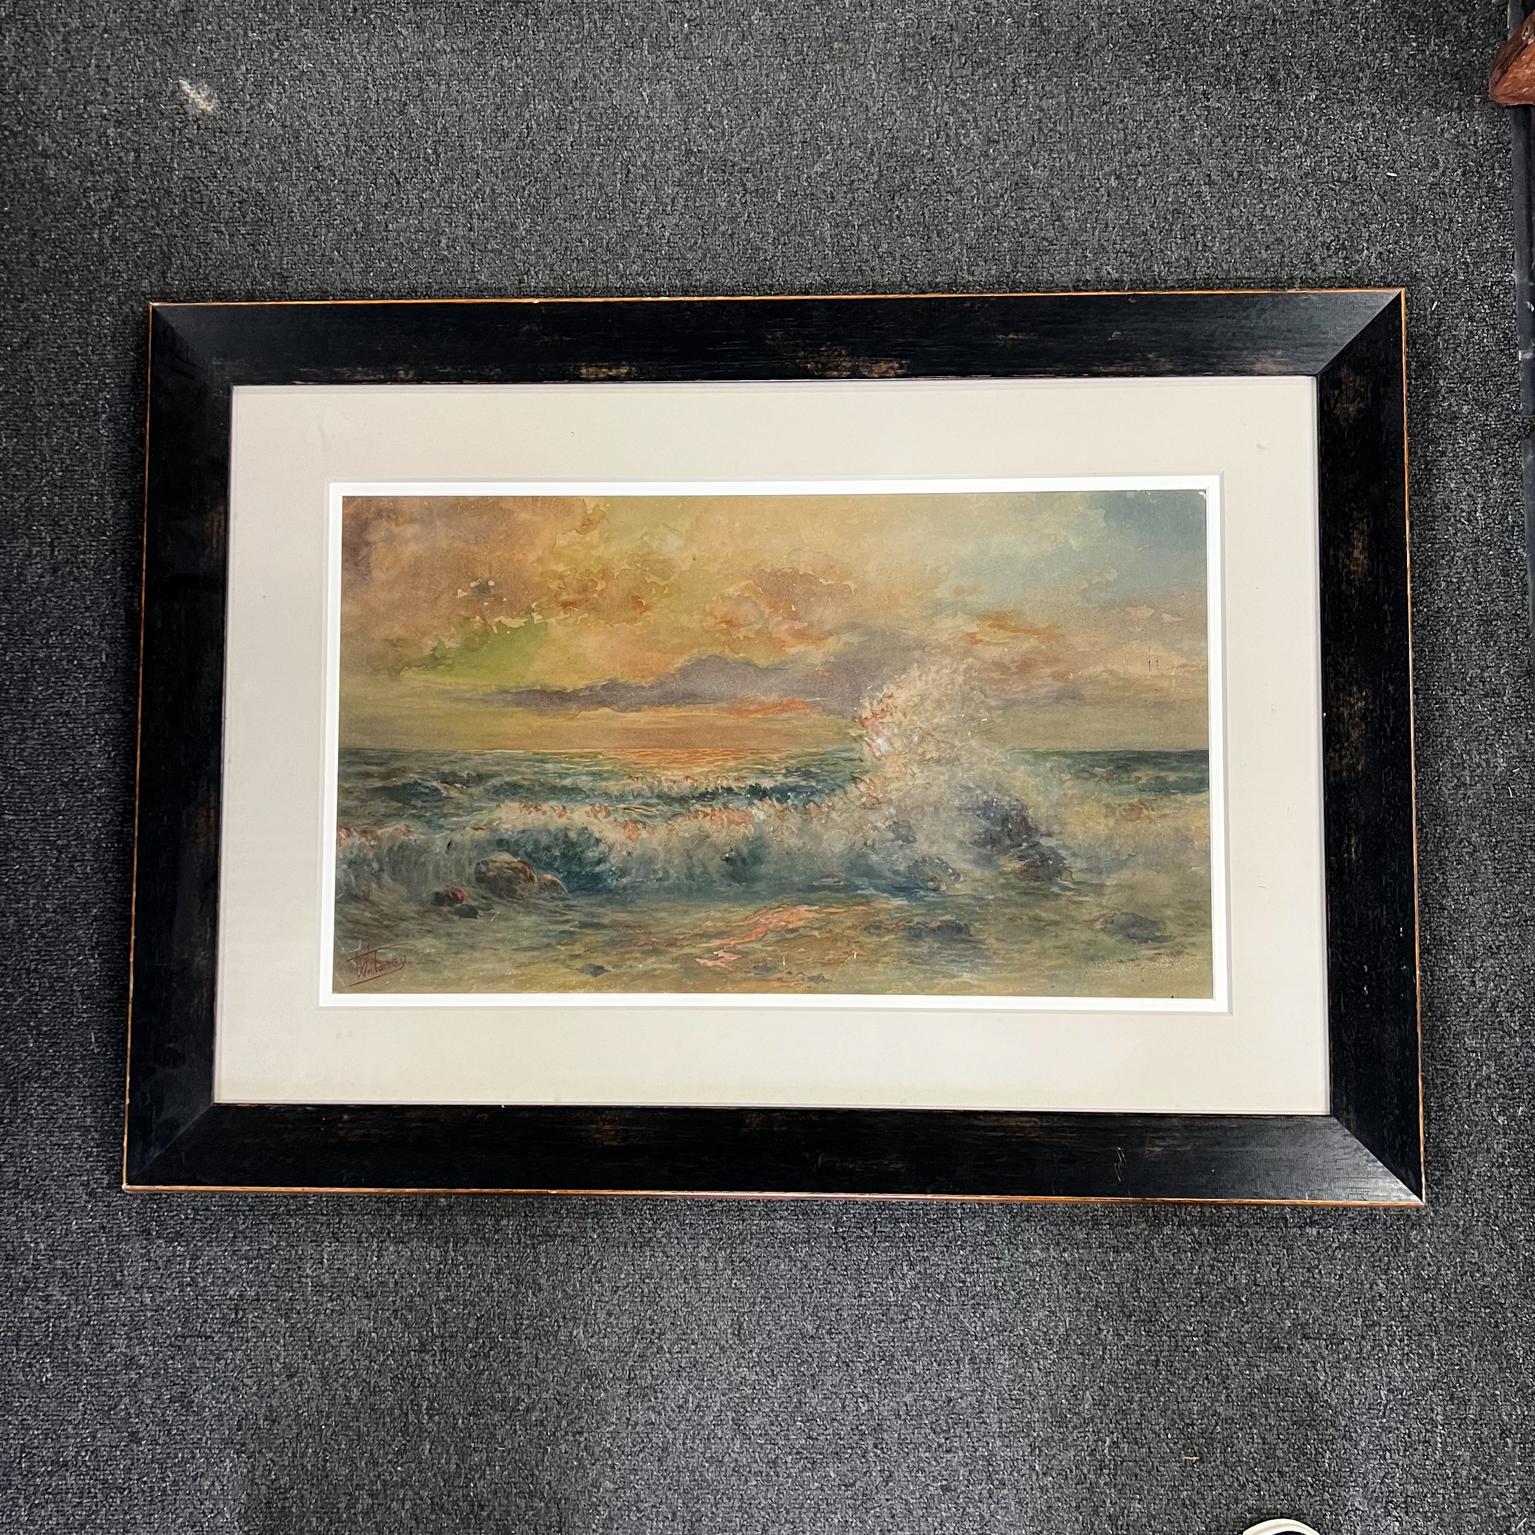 Watercolor Ocean Art painting by artist Wm Torrey
Signed art
Framed art
37.25 w x 26.5 tall x 1.38 d Art 25.5 x 14.75
Preowned unrestored vintage condition.
See images provided.